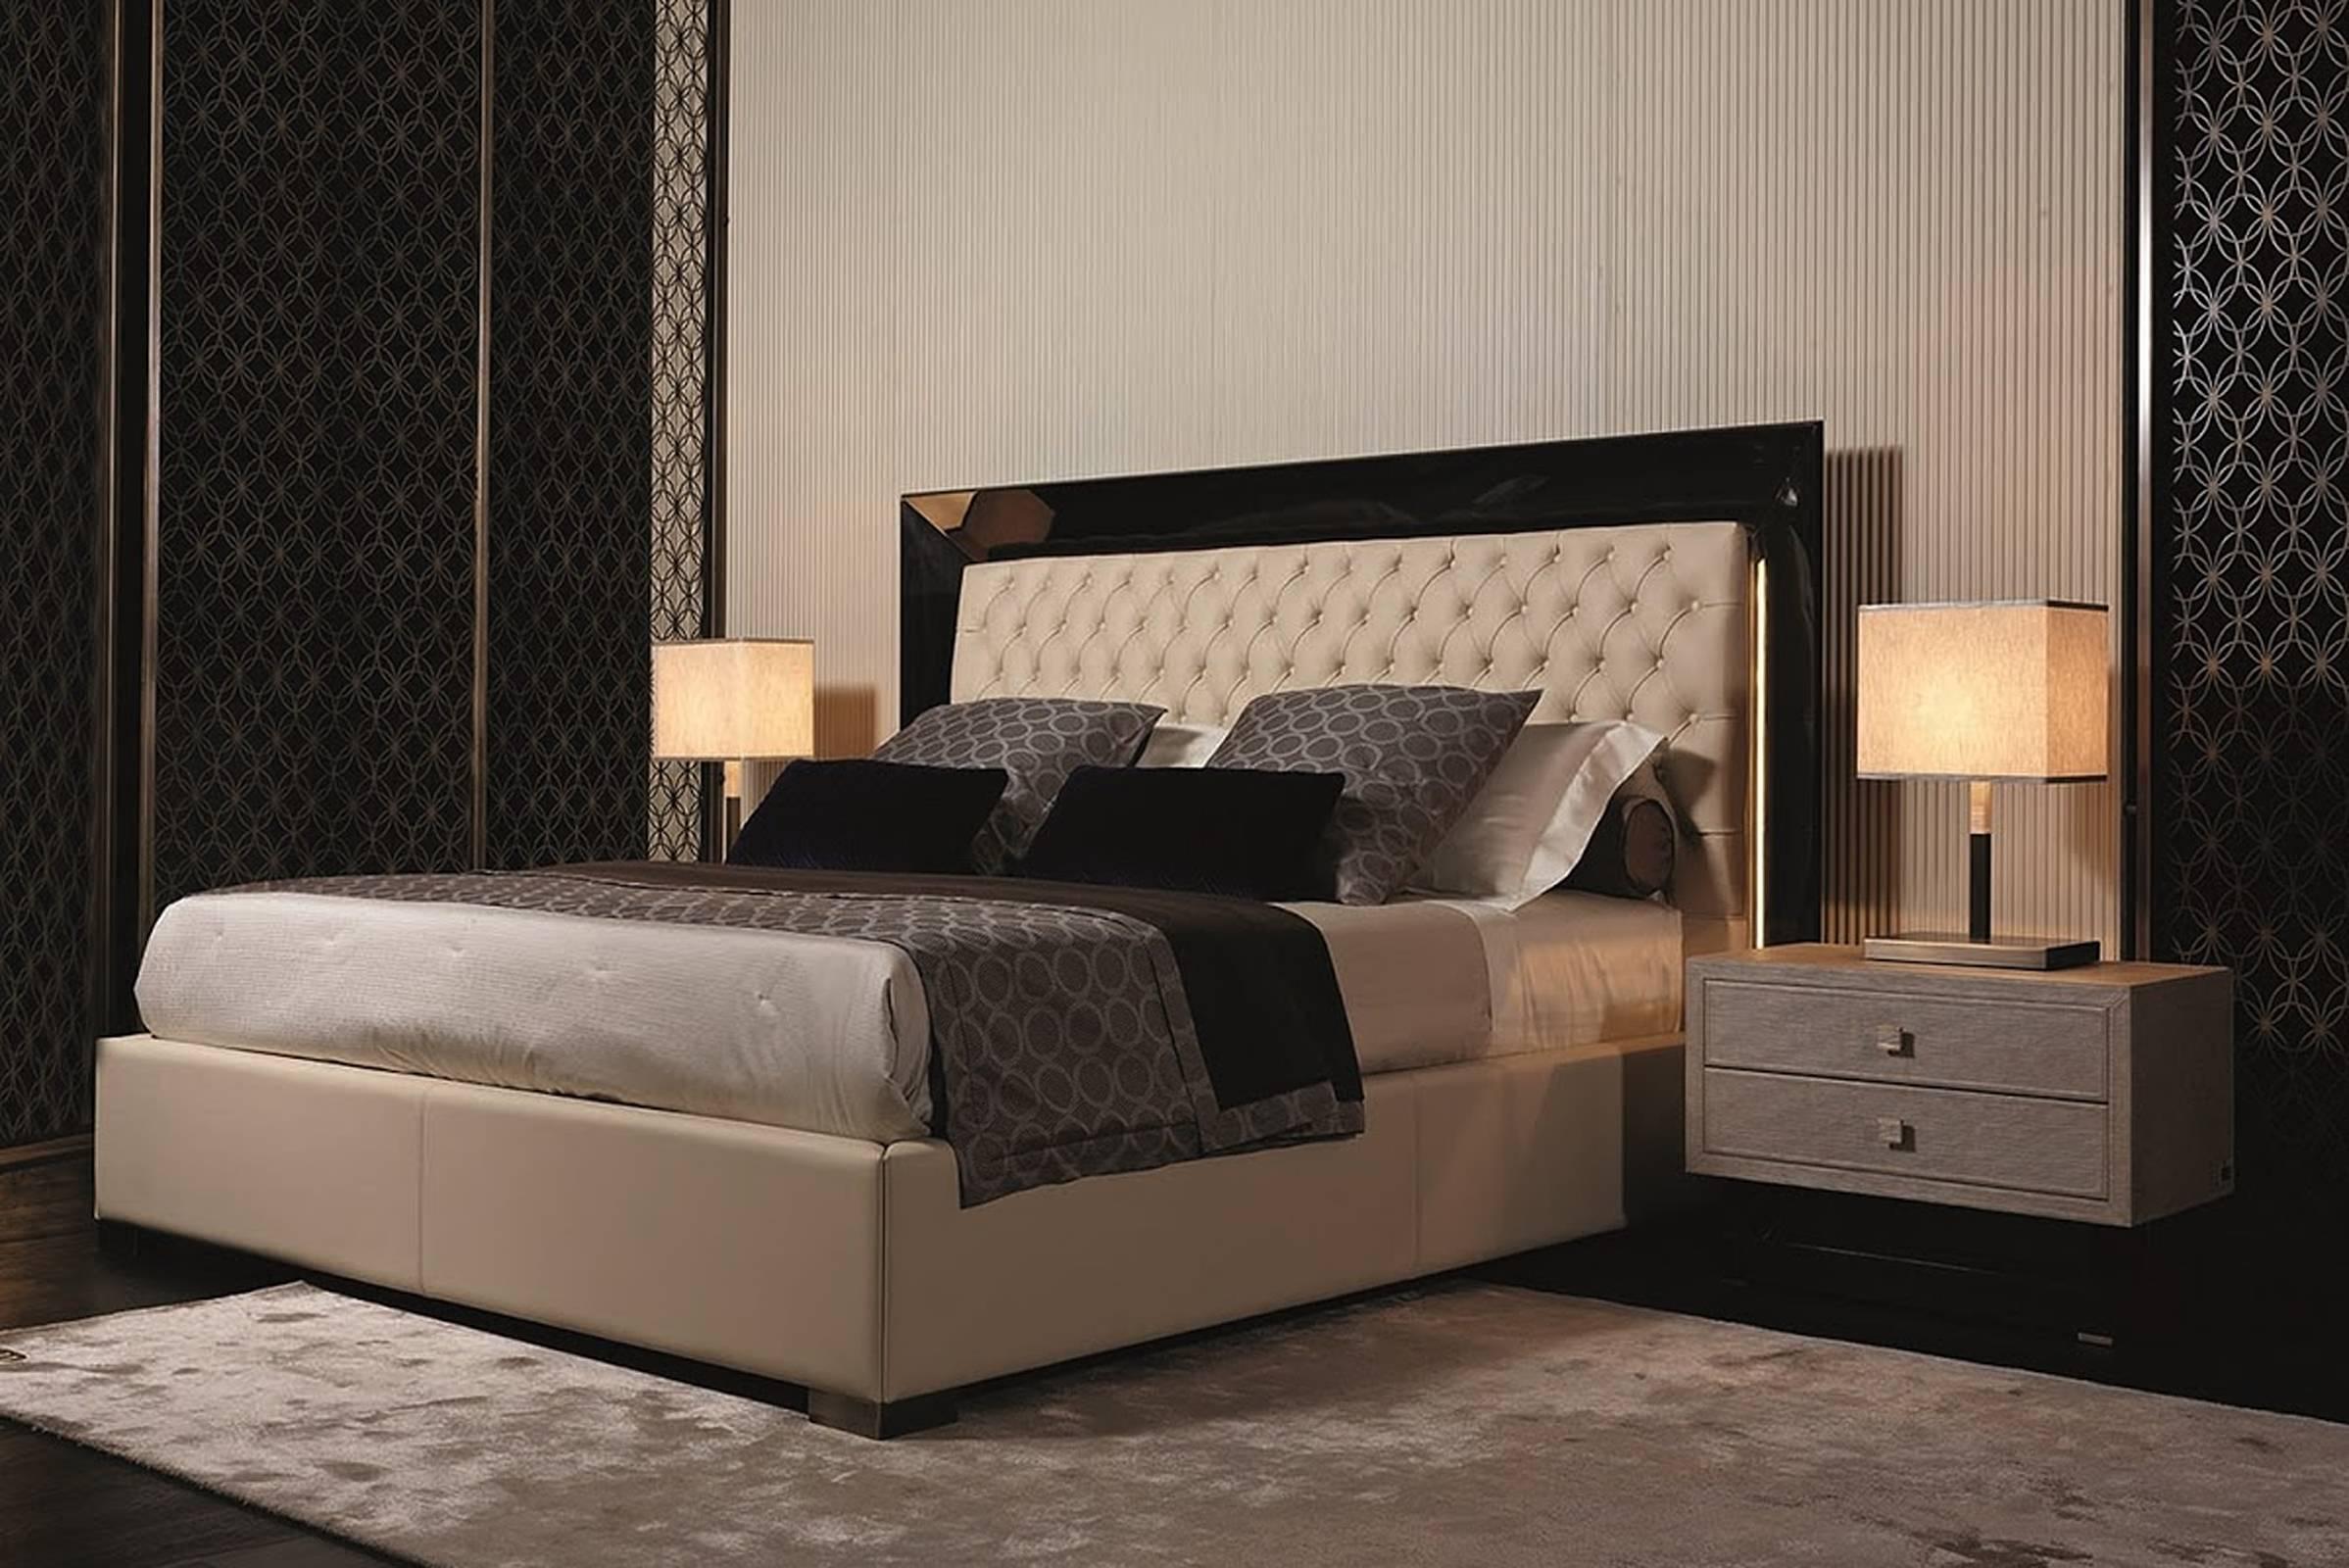 Bed Kany frame and box upholstered with leather category B,
Headboard tapissé with leather category C,
Dimensions: L254 x W217 x H35/144
Ref. 150-2065/200P (Slat 200 not included).
Bed available:
- L214cm/slat 160 and L234cm/slat 180.
- Leather Cat